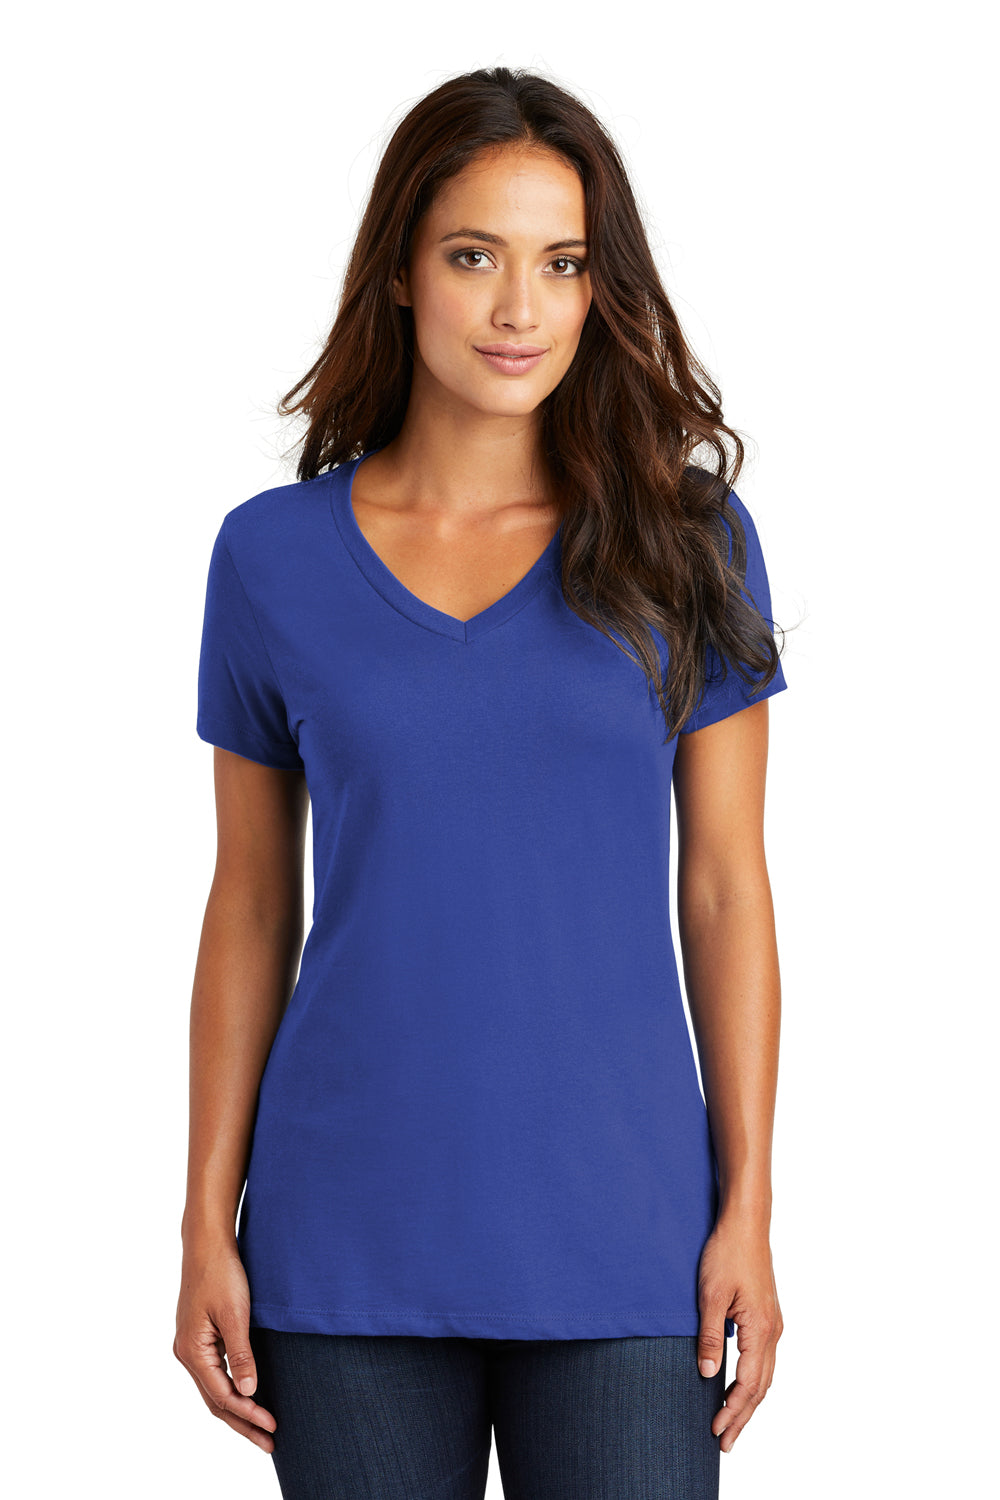 District DM1170L Womens Perfect Weight Short Sleeve V-Neck T-Shirt Royal Blue Front